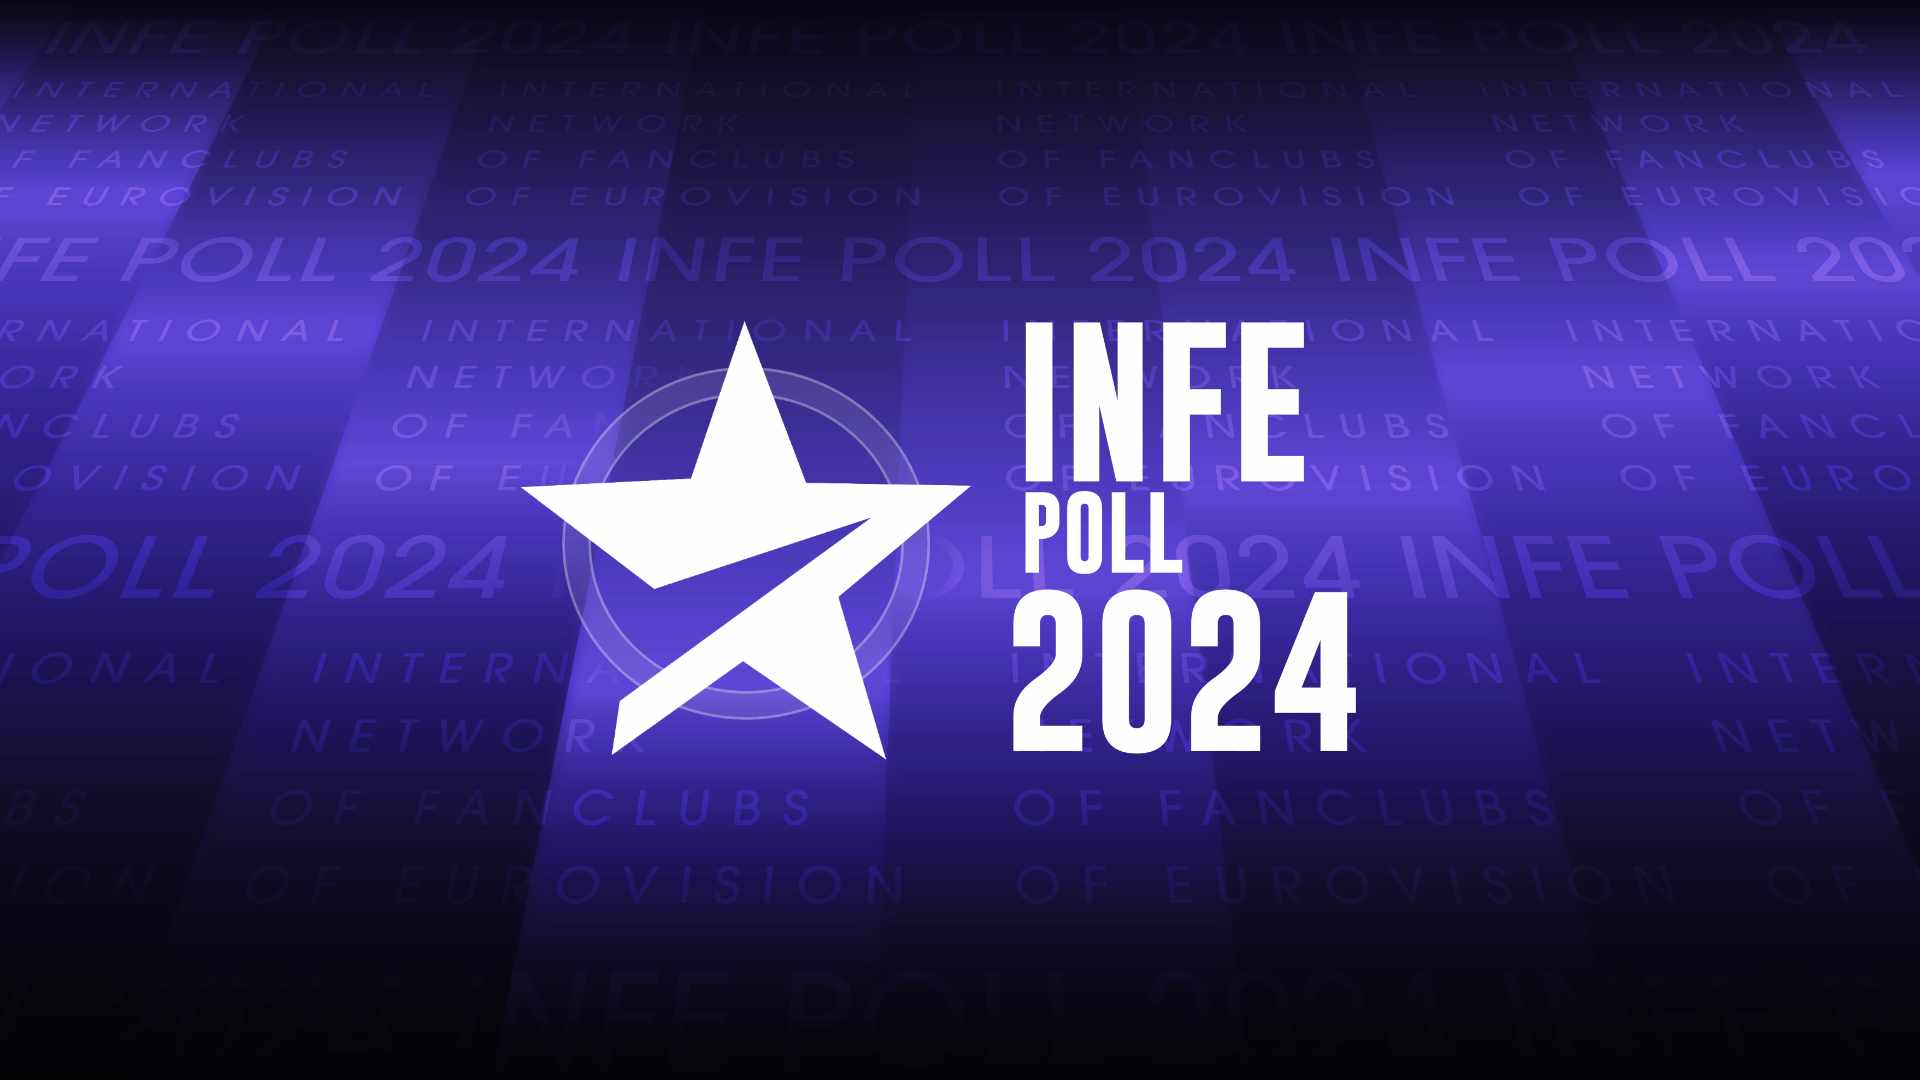 Eurovision 2024 INFE Poll 2024 INFE Czechia's surprising choices